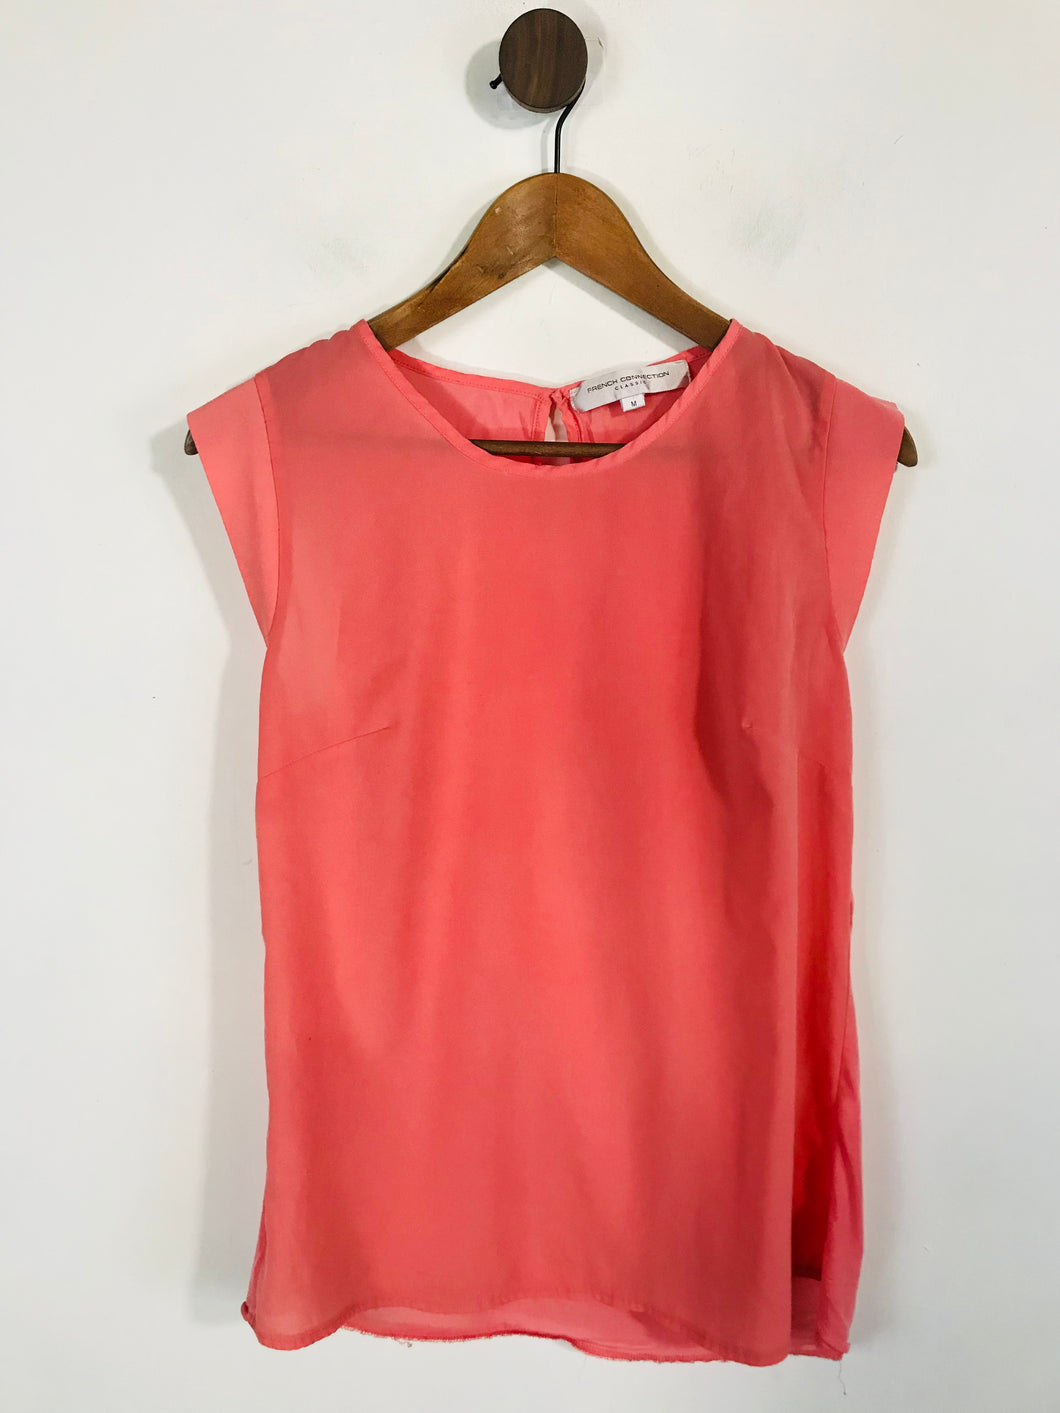 French Connection Women's Tank Top | M UK10-12 | Pink